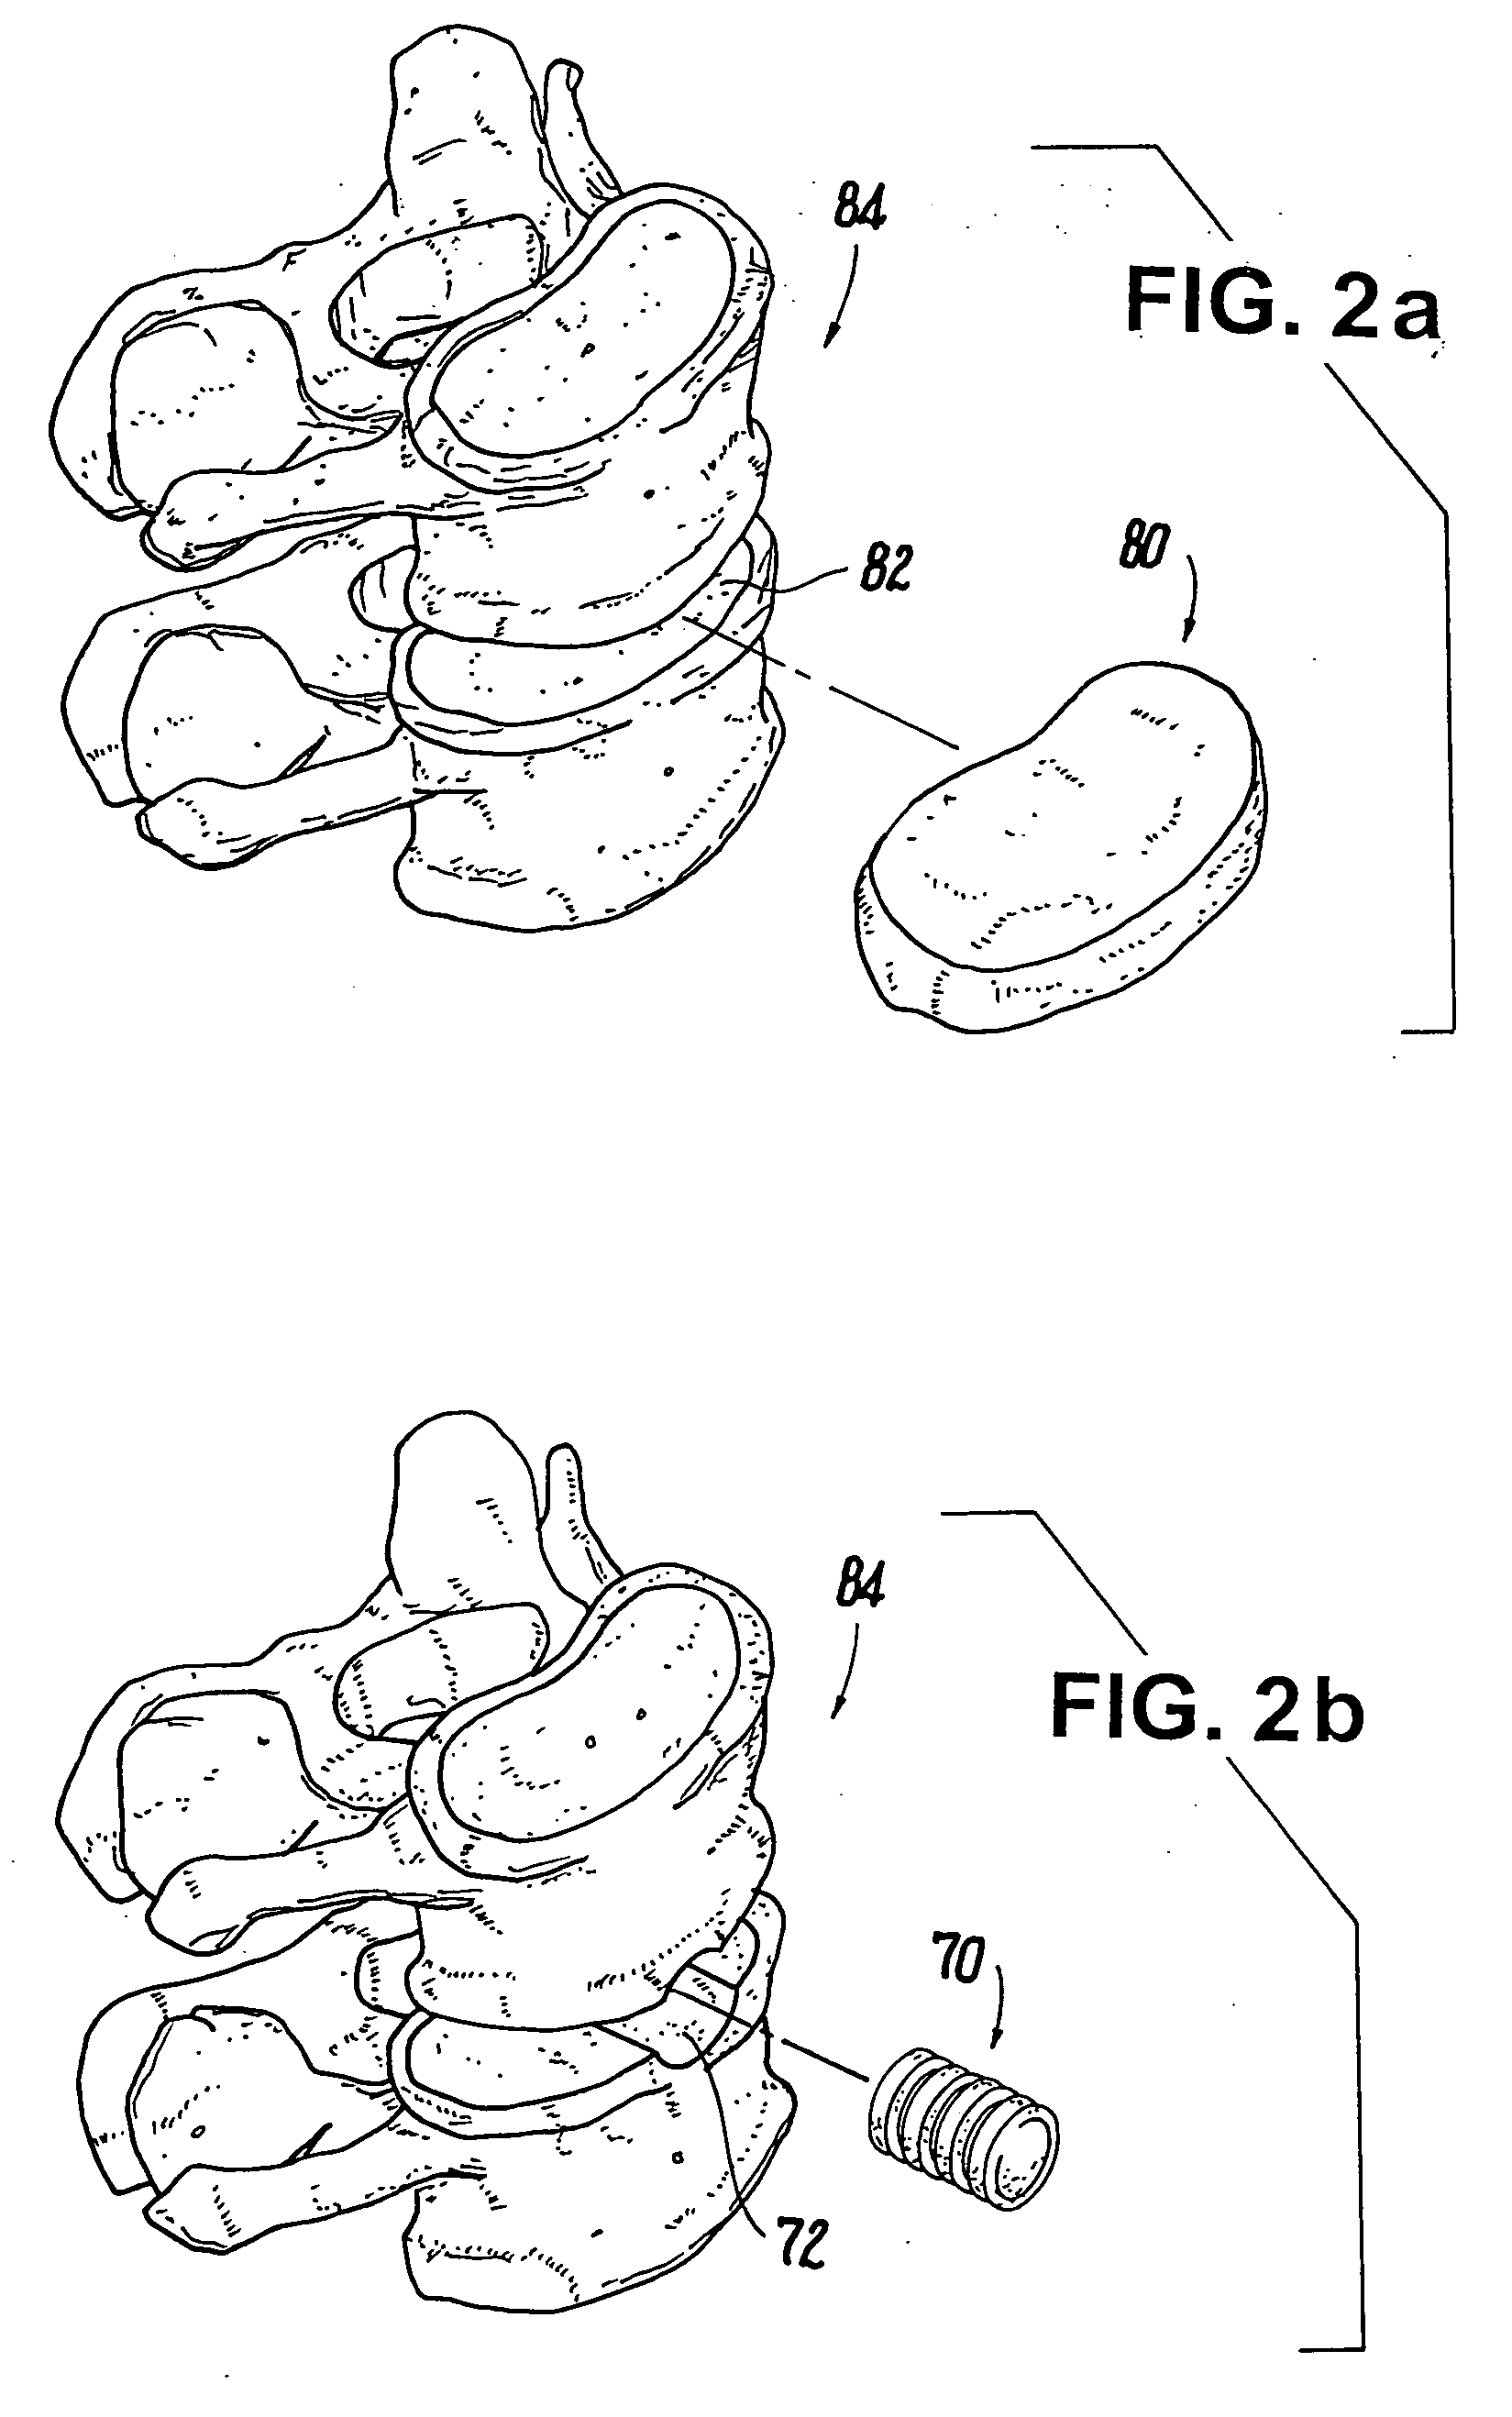 Shaped load-bearing osteoimplant and methods of making same